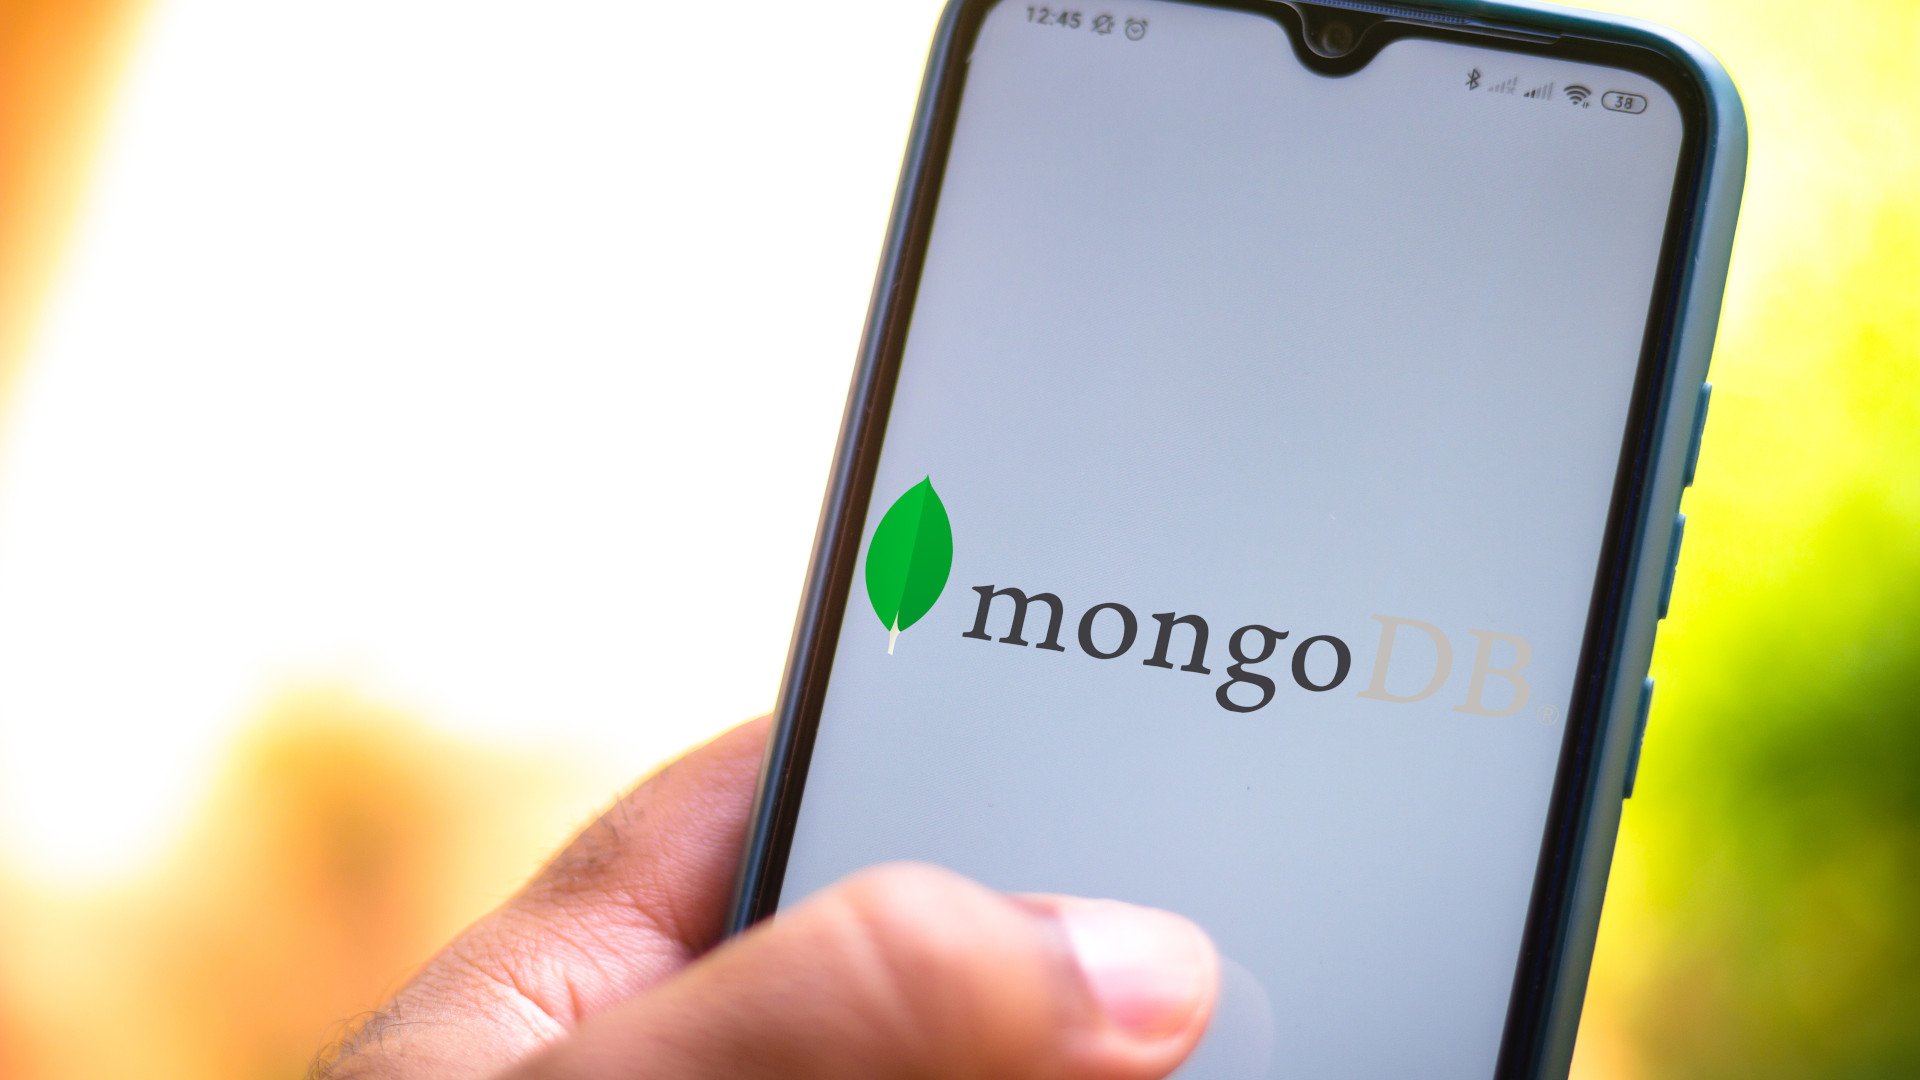 MongoDB: a new technology for end-to-end encryption